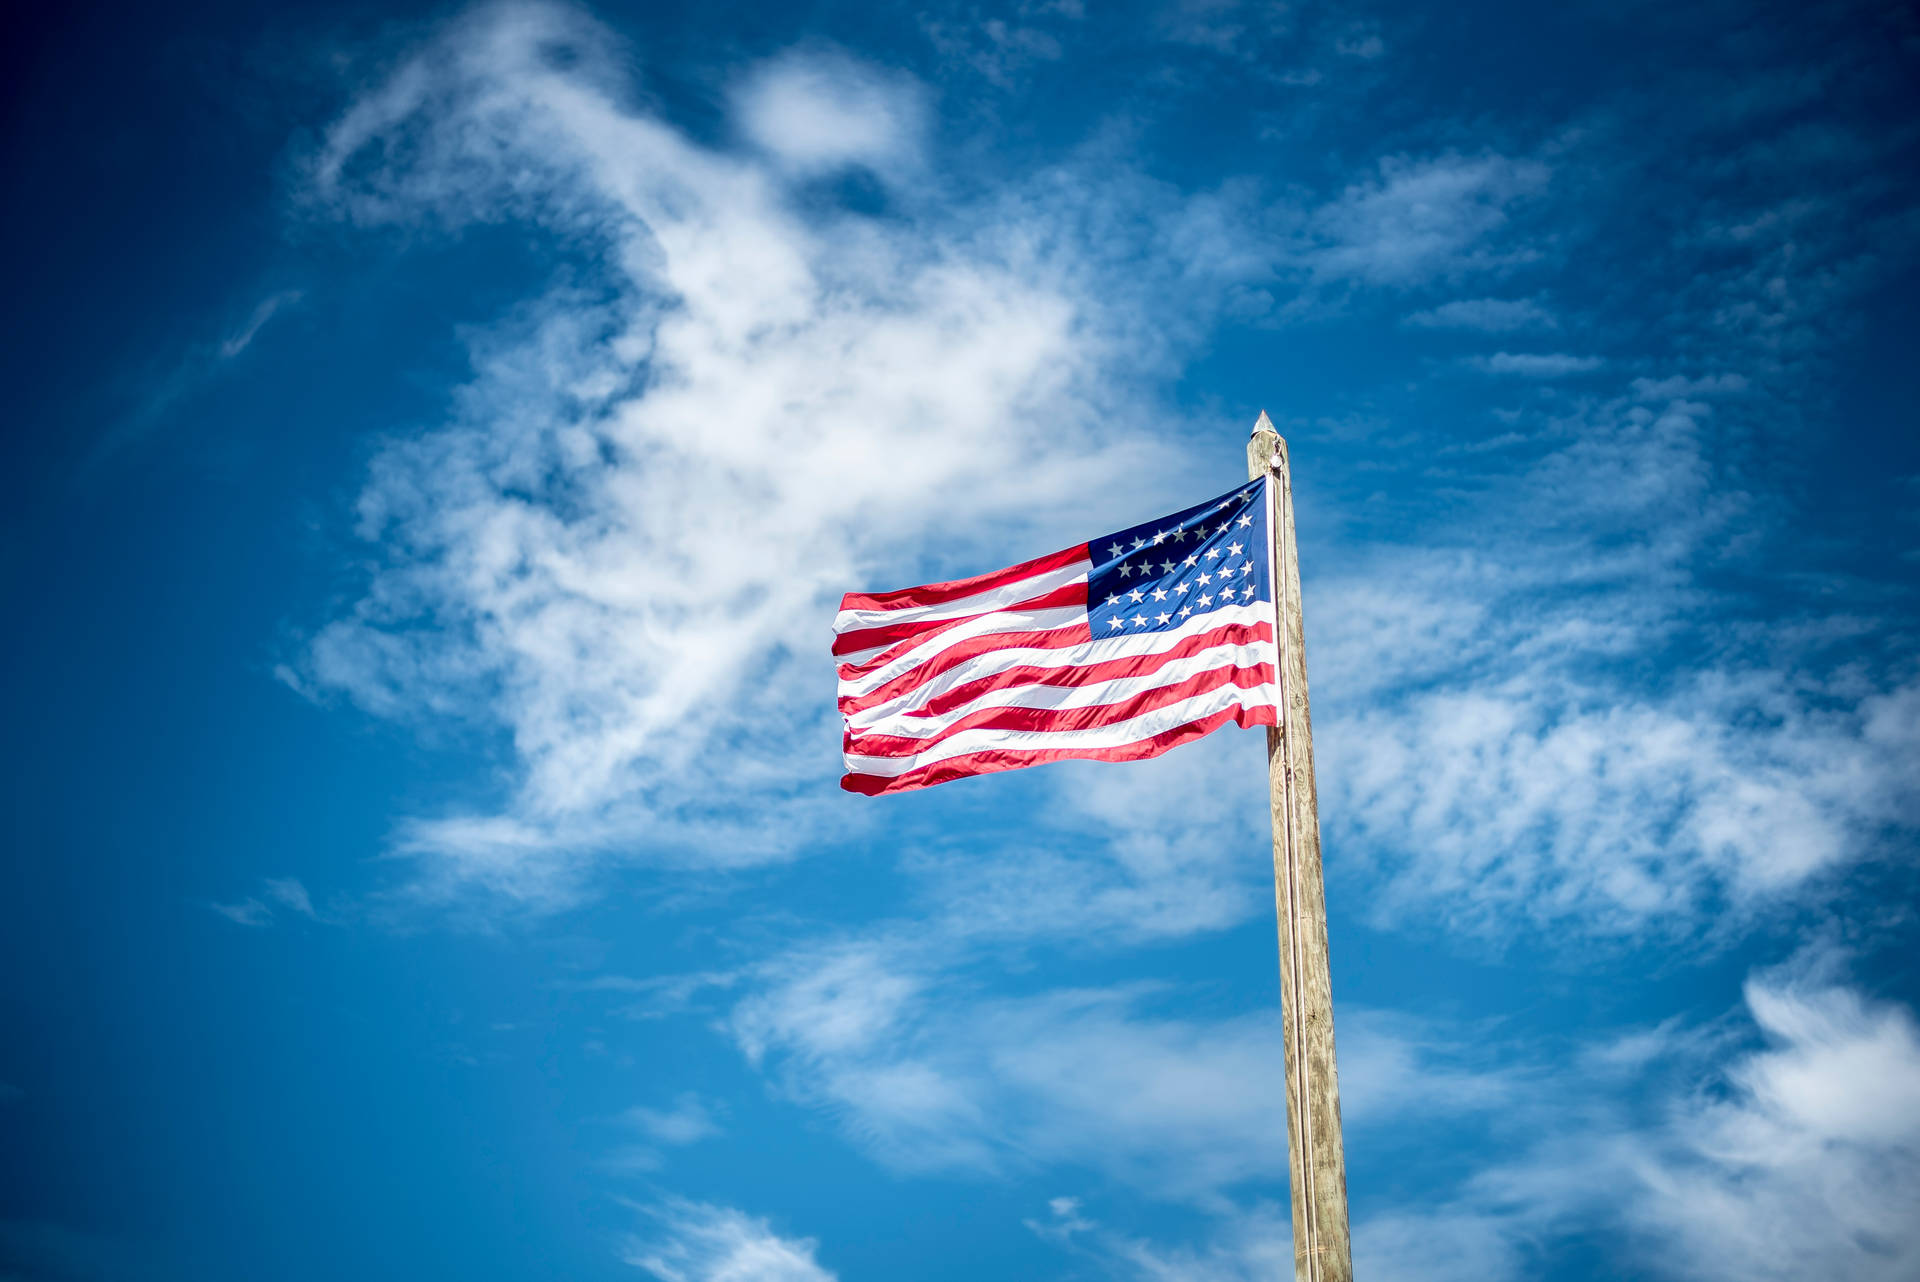 Patriotic 6016X4016 Wallpaper and Background Image